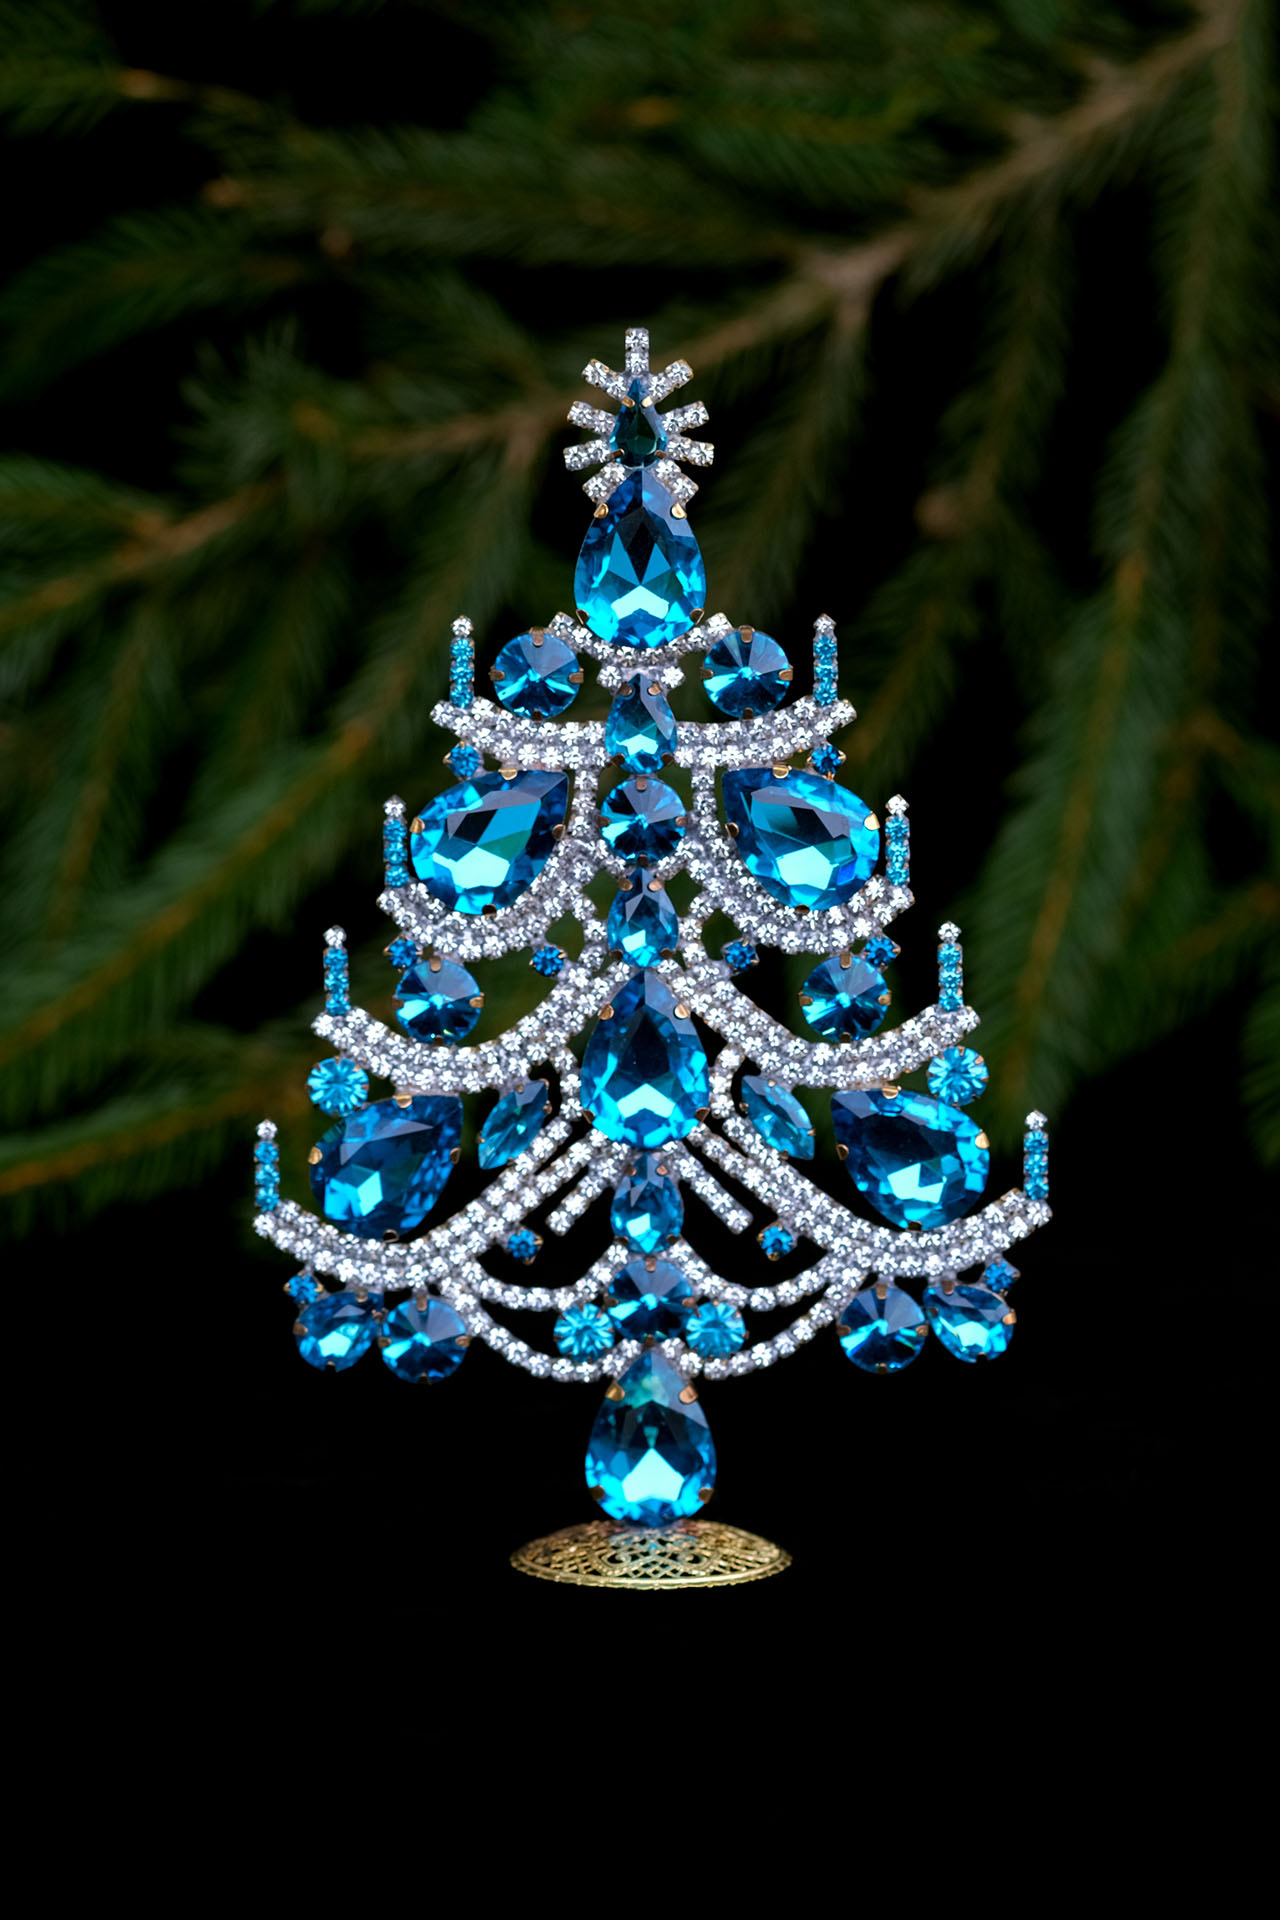 Charming Xmas tree - handcrafted and decorated with blue crystal